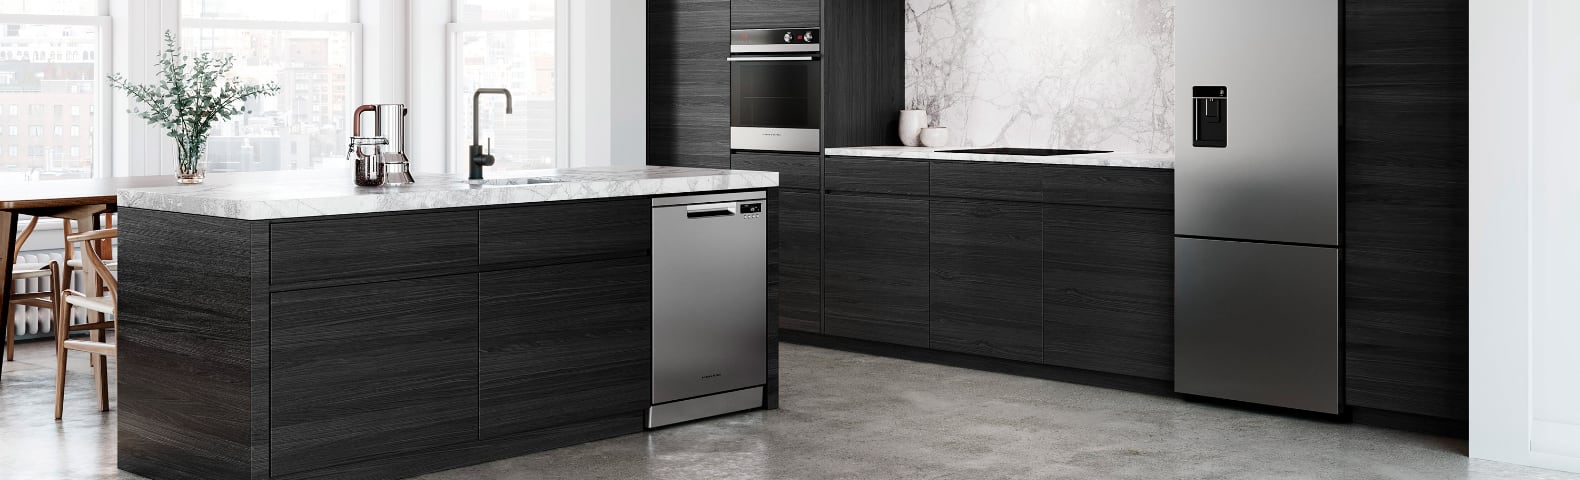 fisher and paykel lifestyle